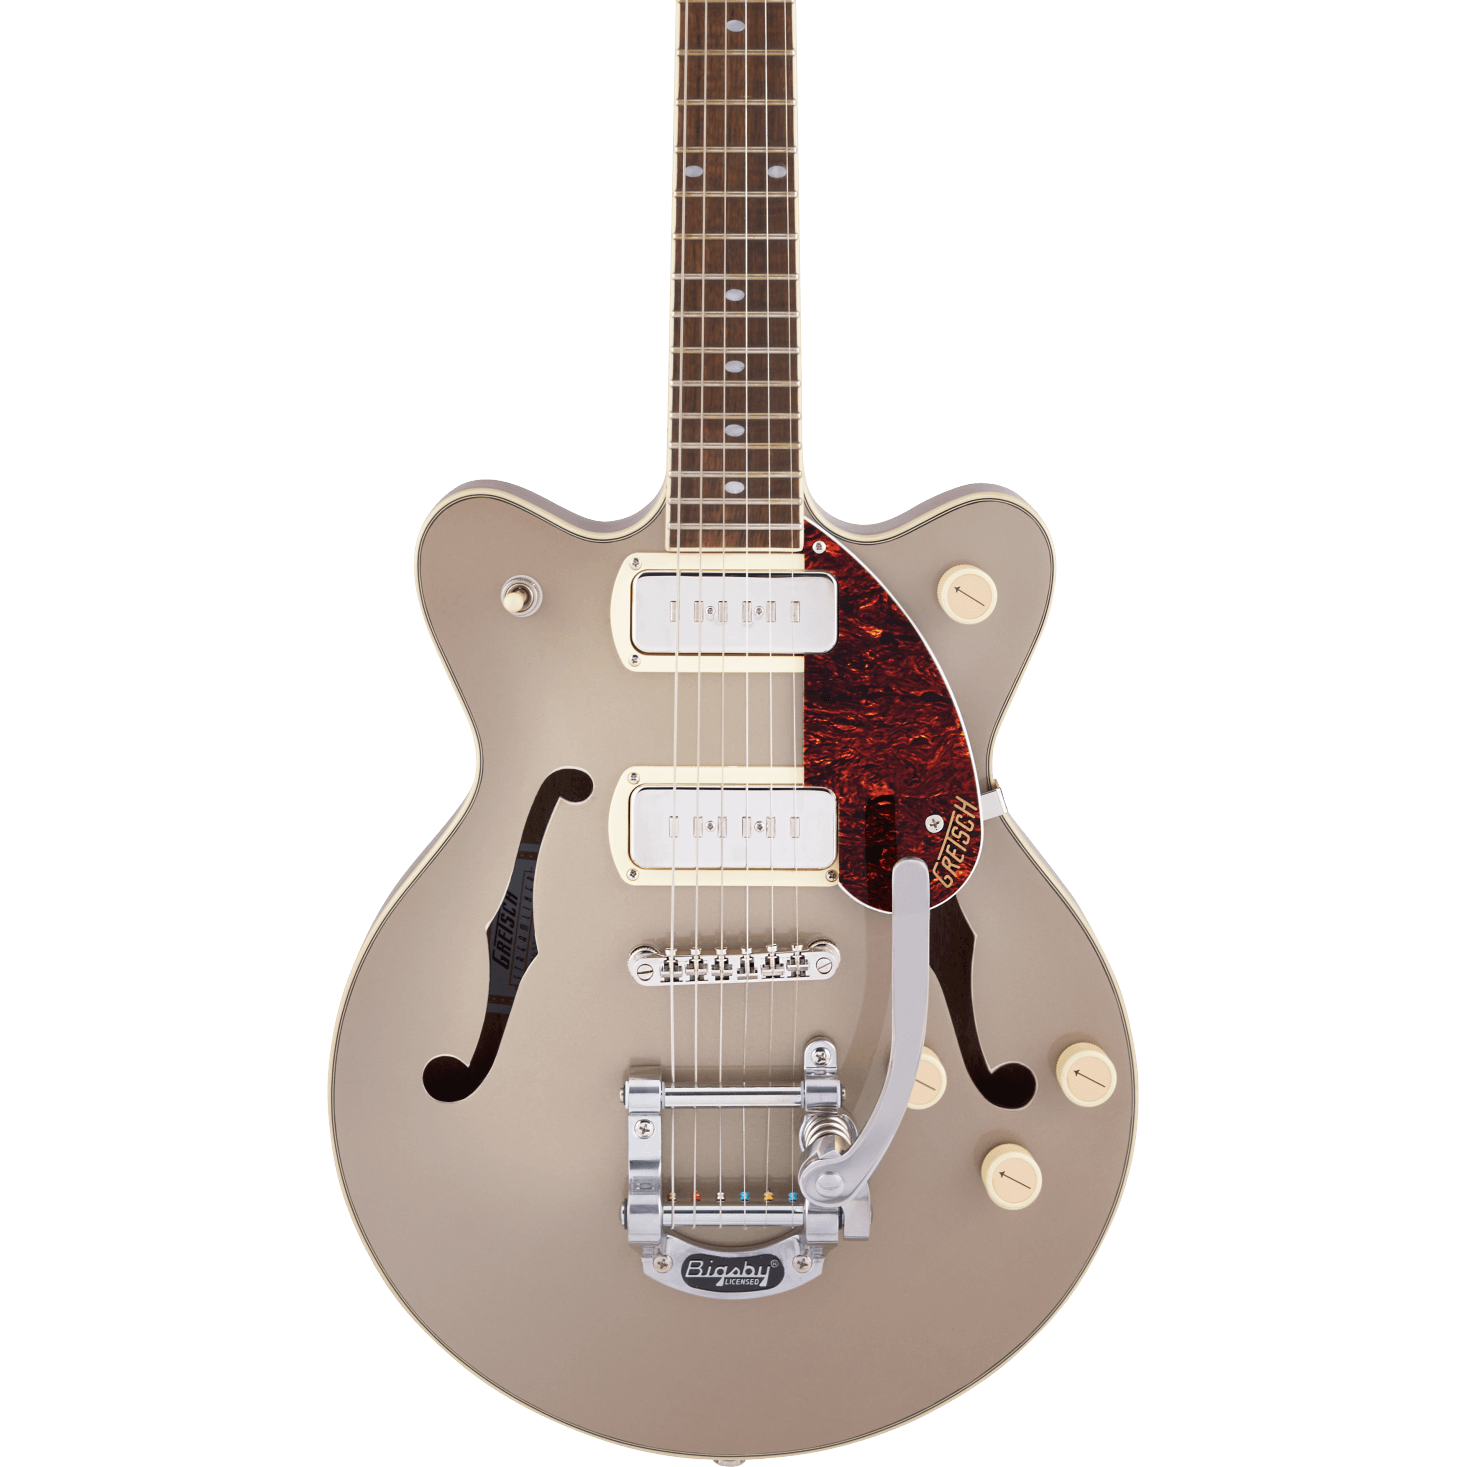 Gretsch G2655T-P90 Streamliner Jr. Double-Cut P90, Two-Tone Sahara Metallic and Vintage Mahogany Stain - Regent Sounds